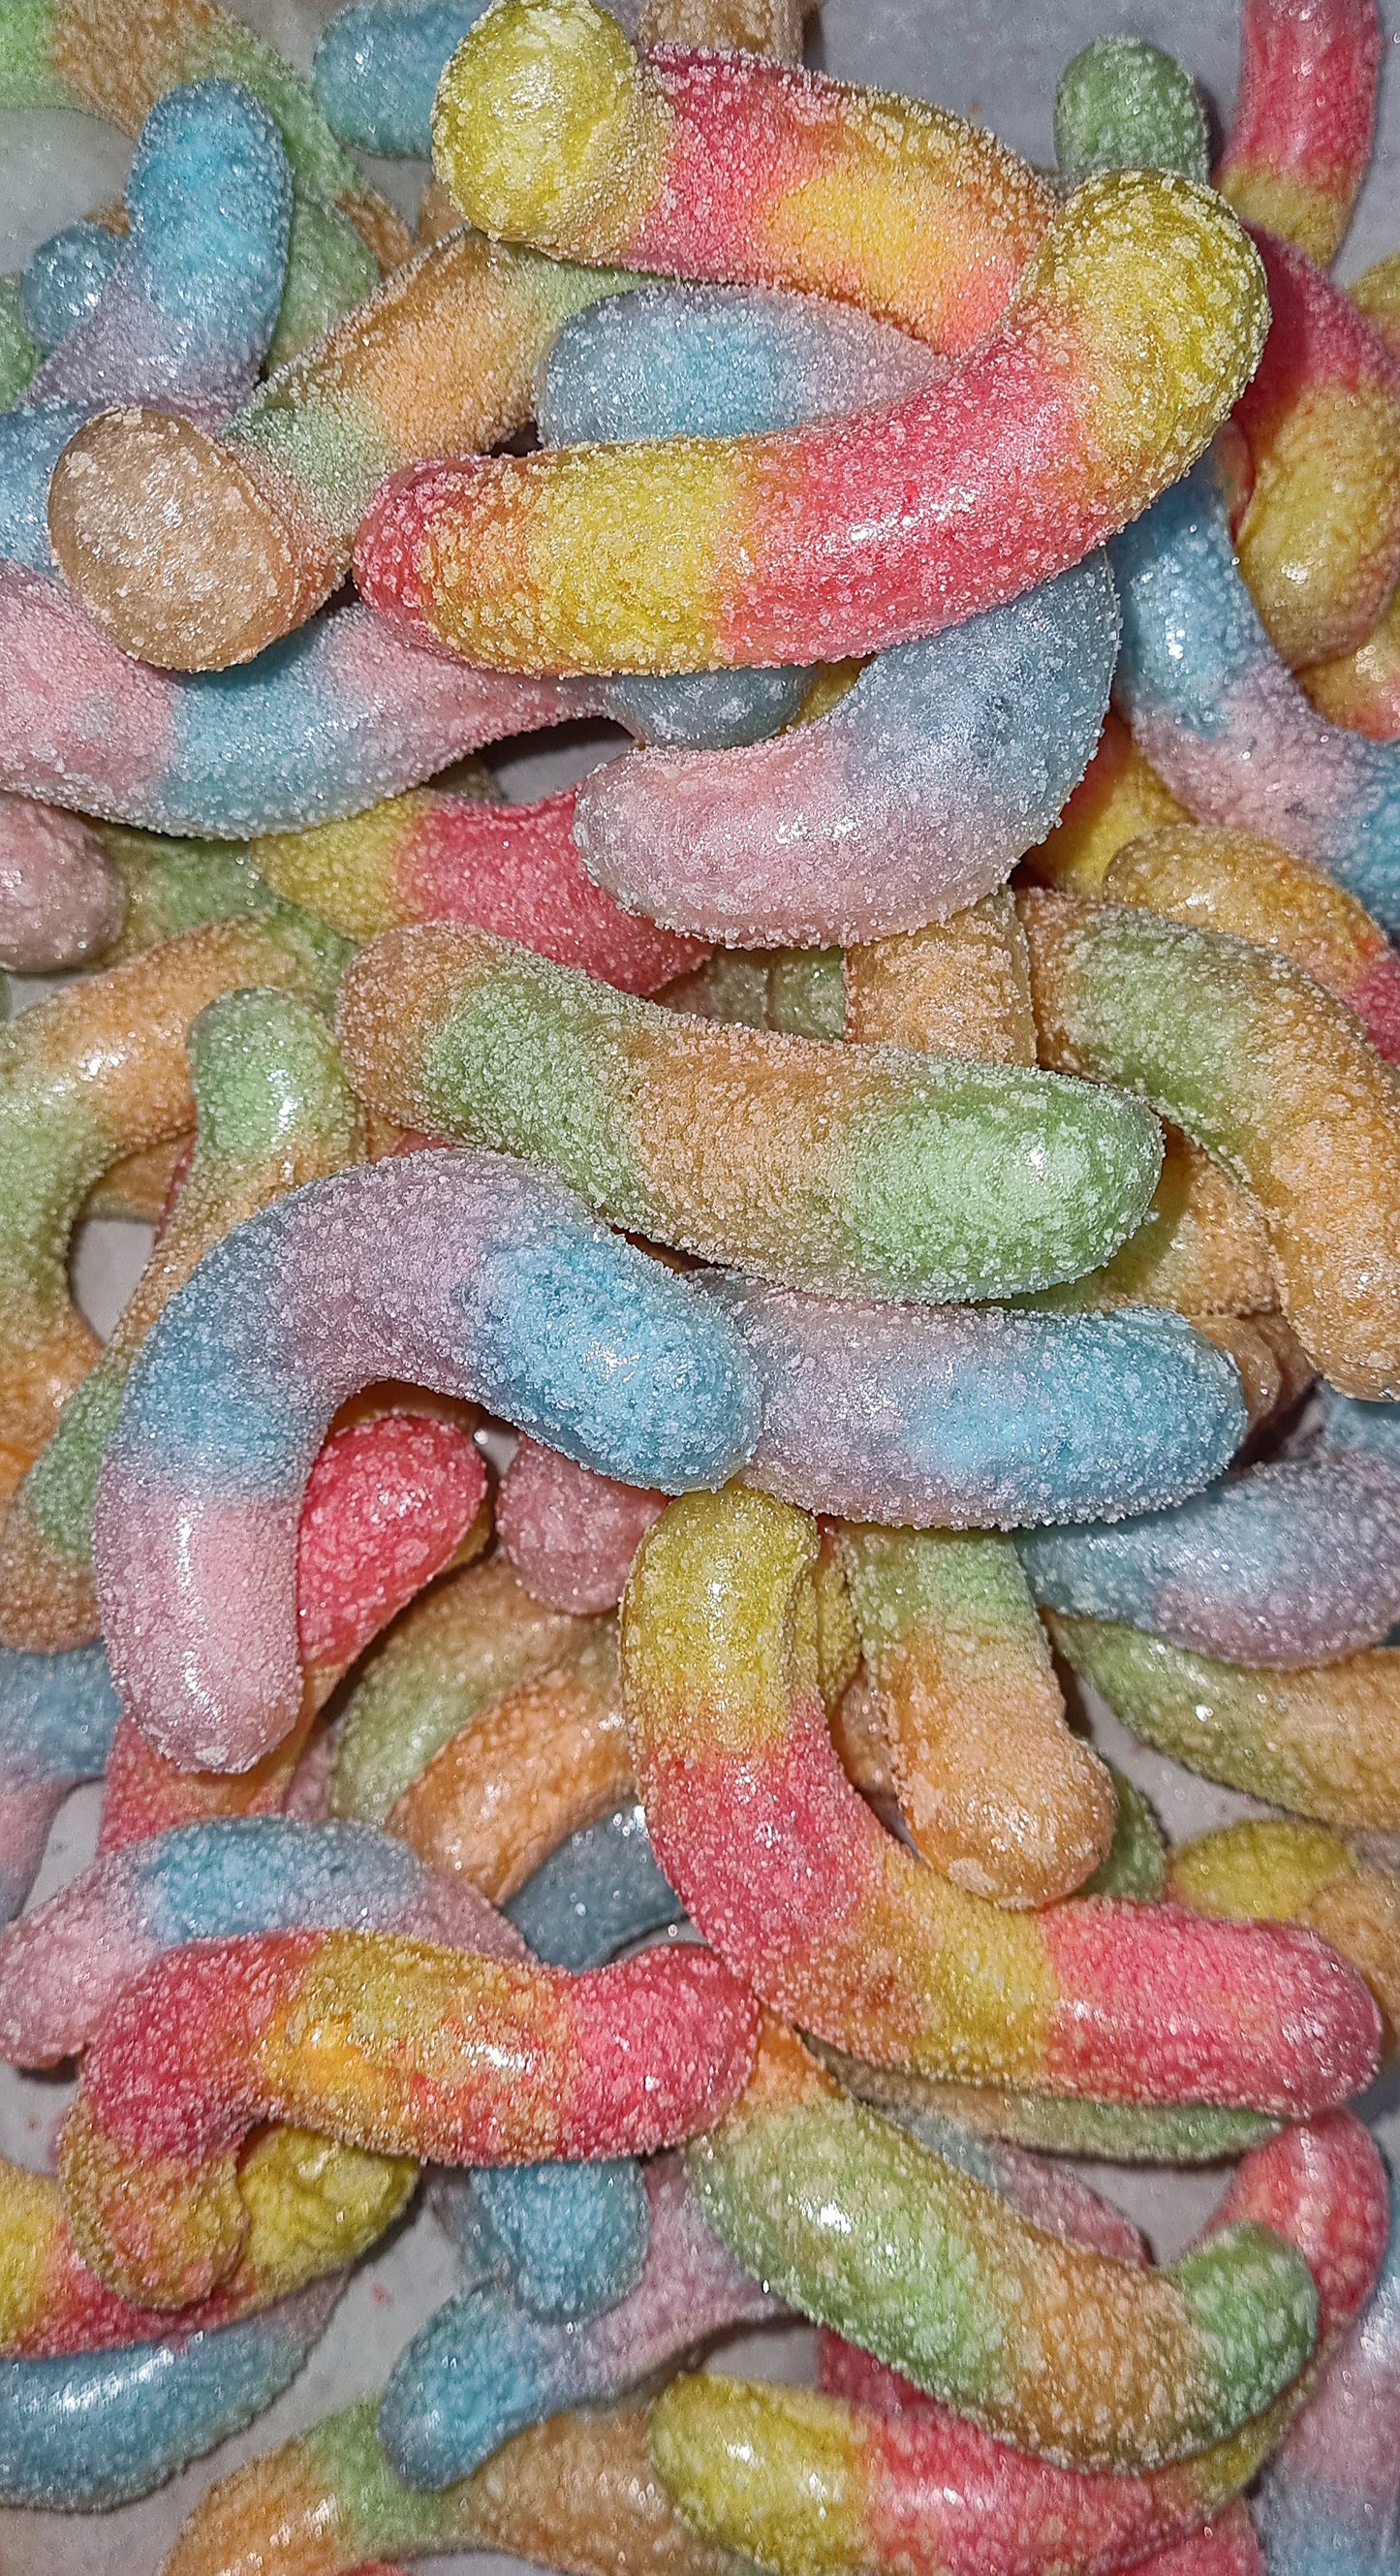 FREEZE DRIED Sour Worms